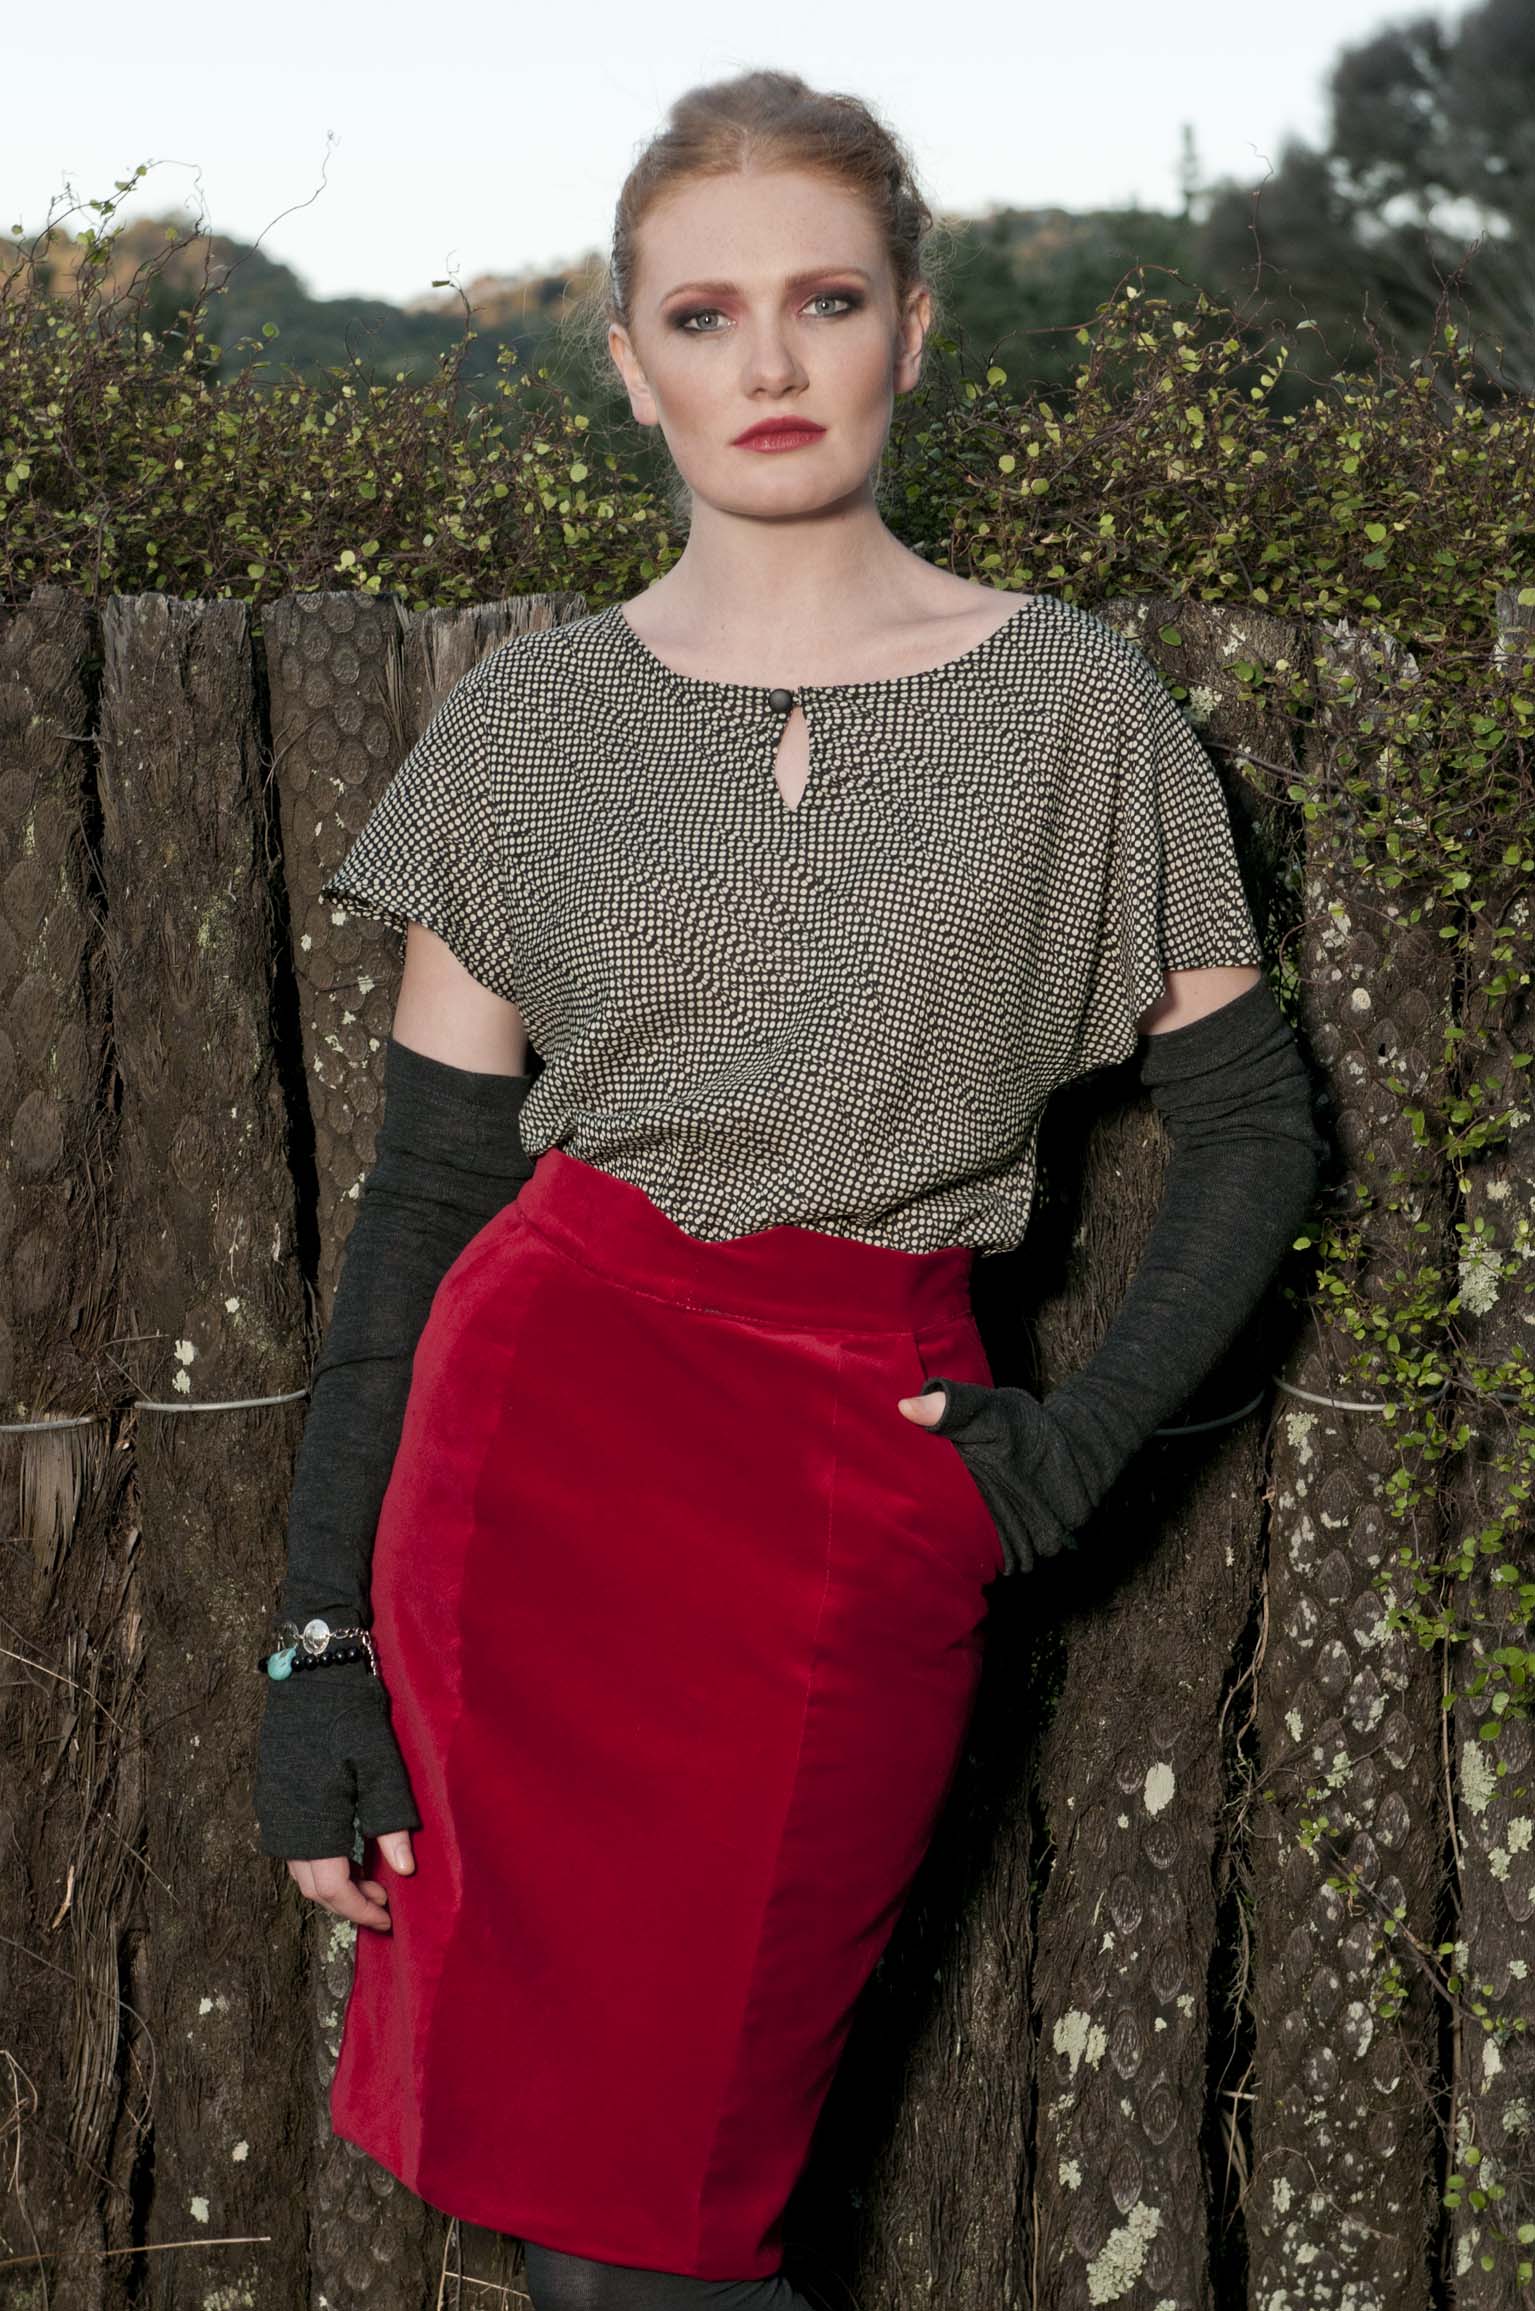 Red tight skirt and red lipstick. Photo by Anais Chaine Photography Auckland, NZ, wearing Selector clothing. Fashion photoshoot in Bethells, Waitekere range